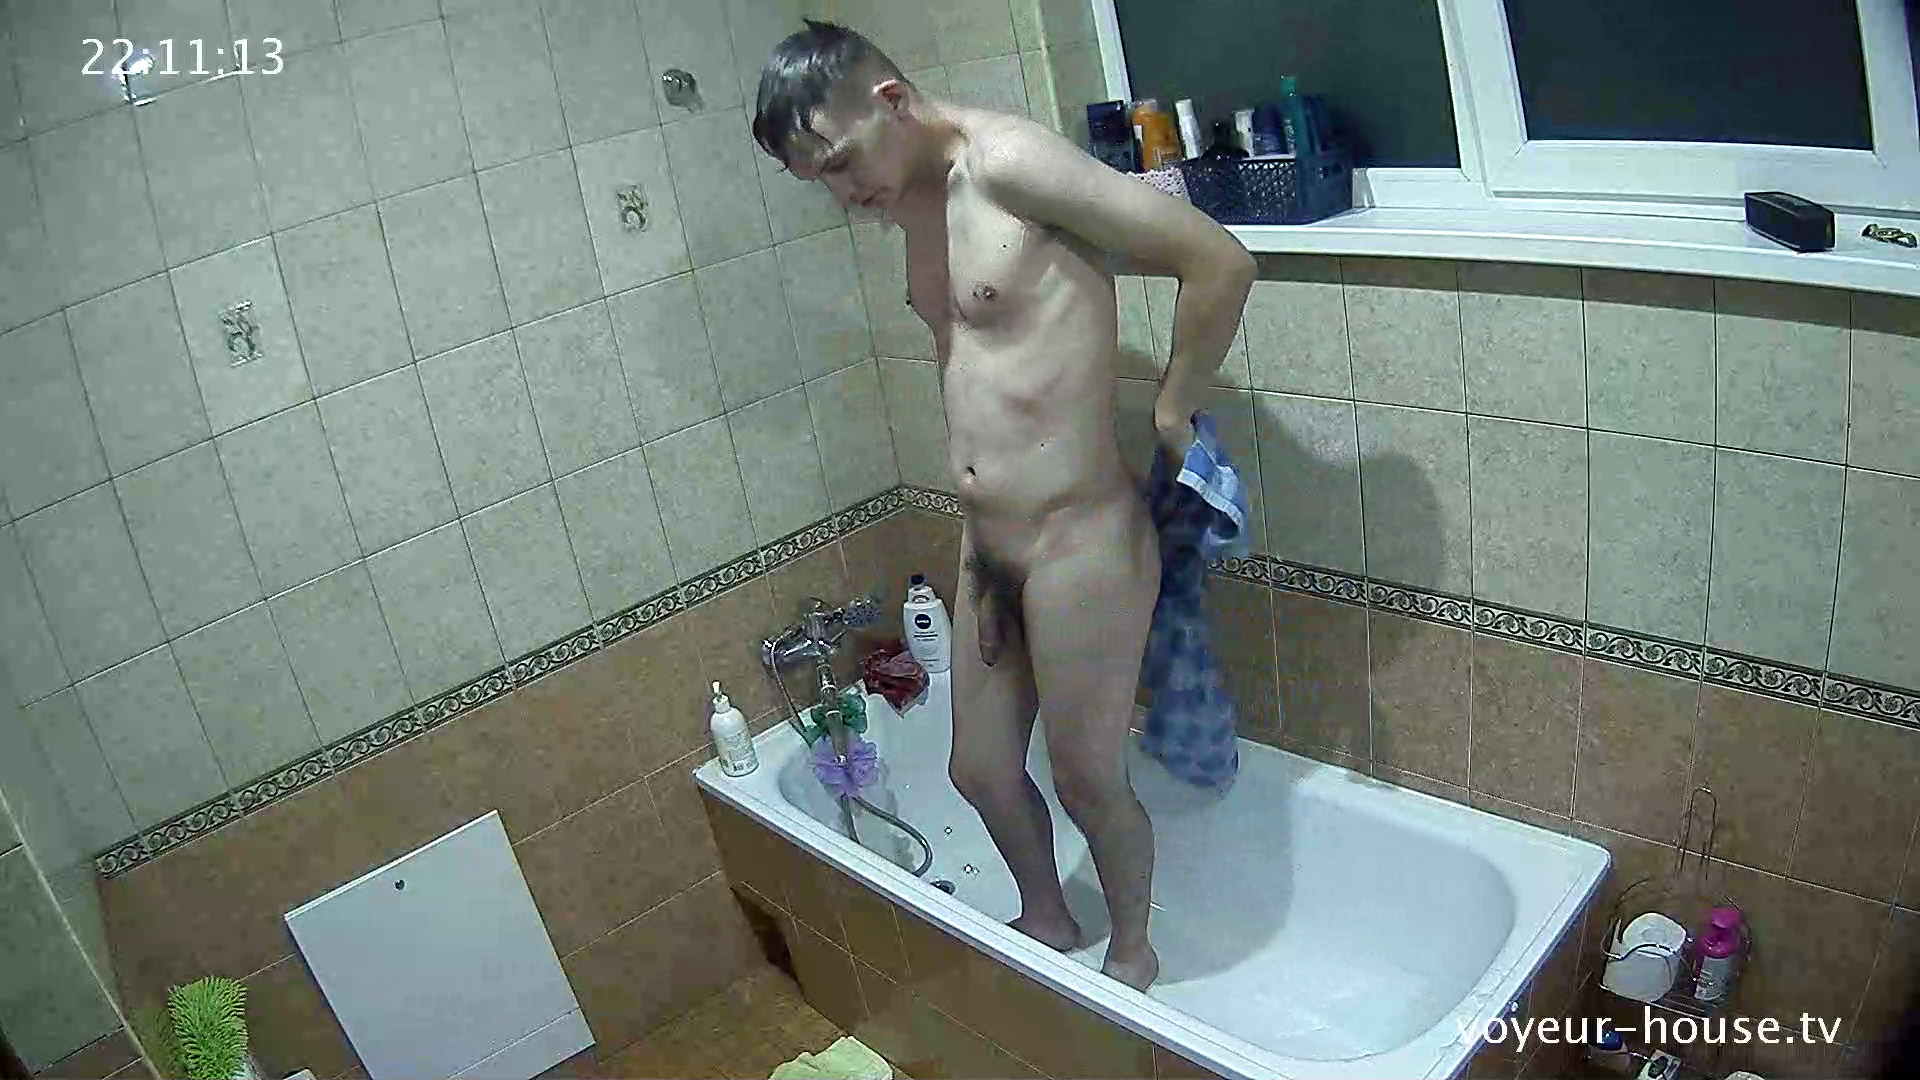 Guest guy takes a shower 9th Sep 2017